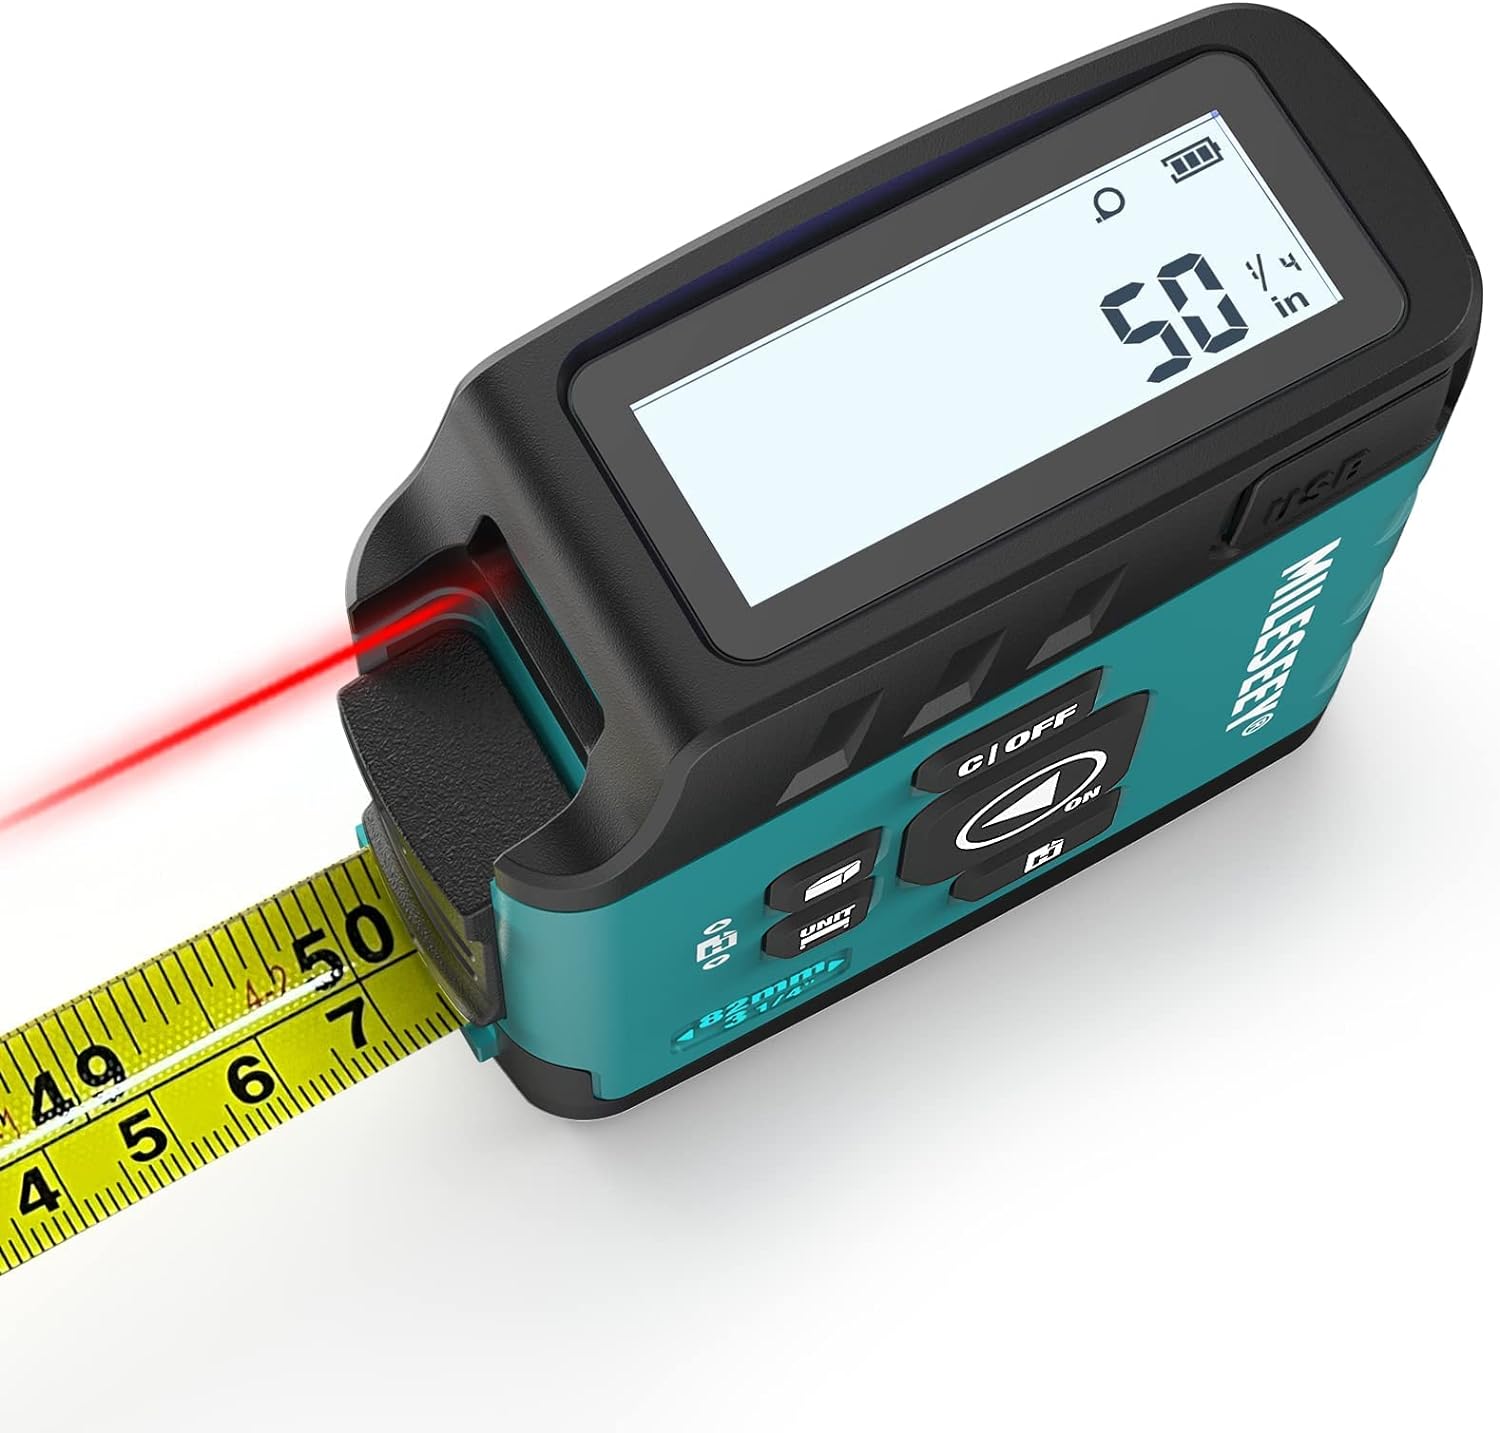 Digital Measuring Tape with laser - Waterproof and Rechargeable